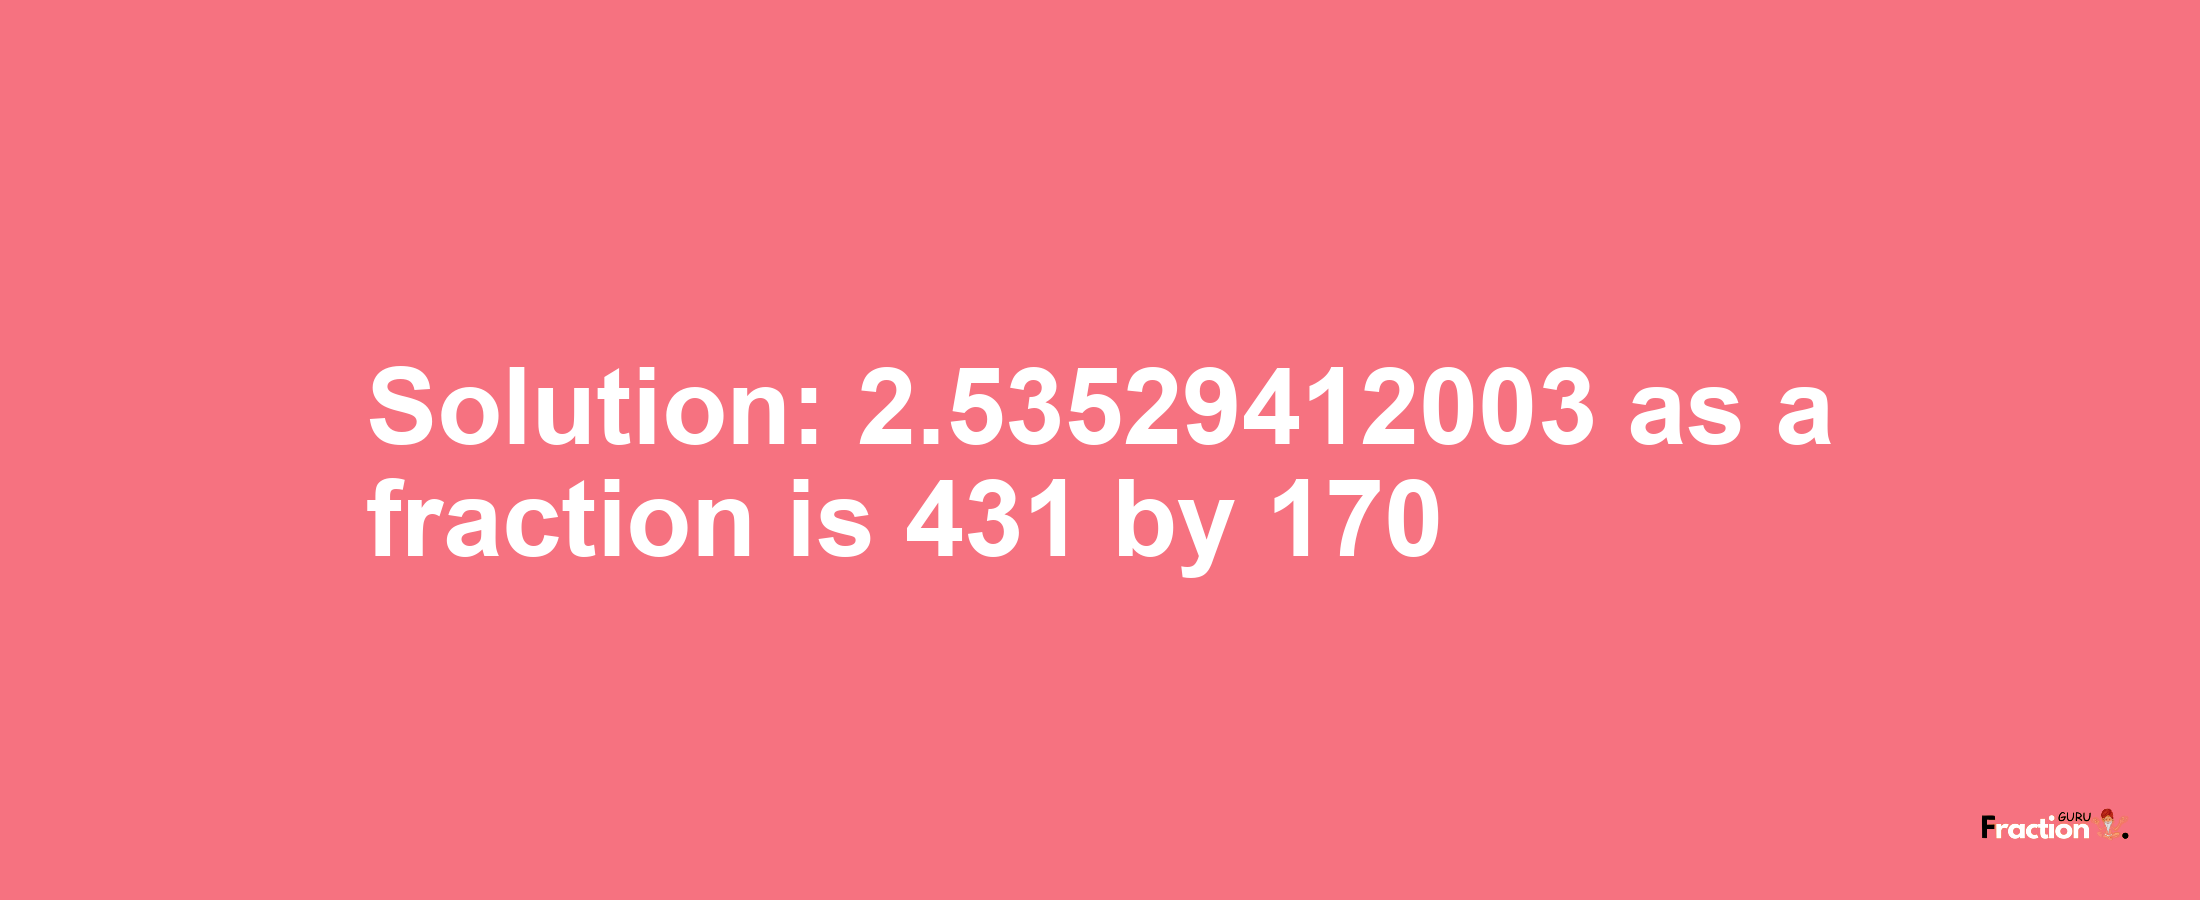 Solution:2.53529412003 as a fraction is 431/170